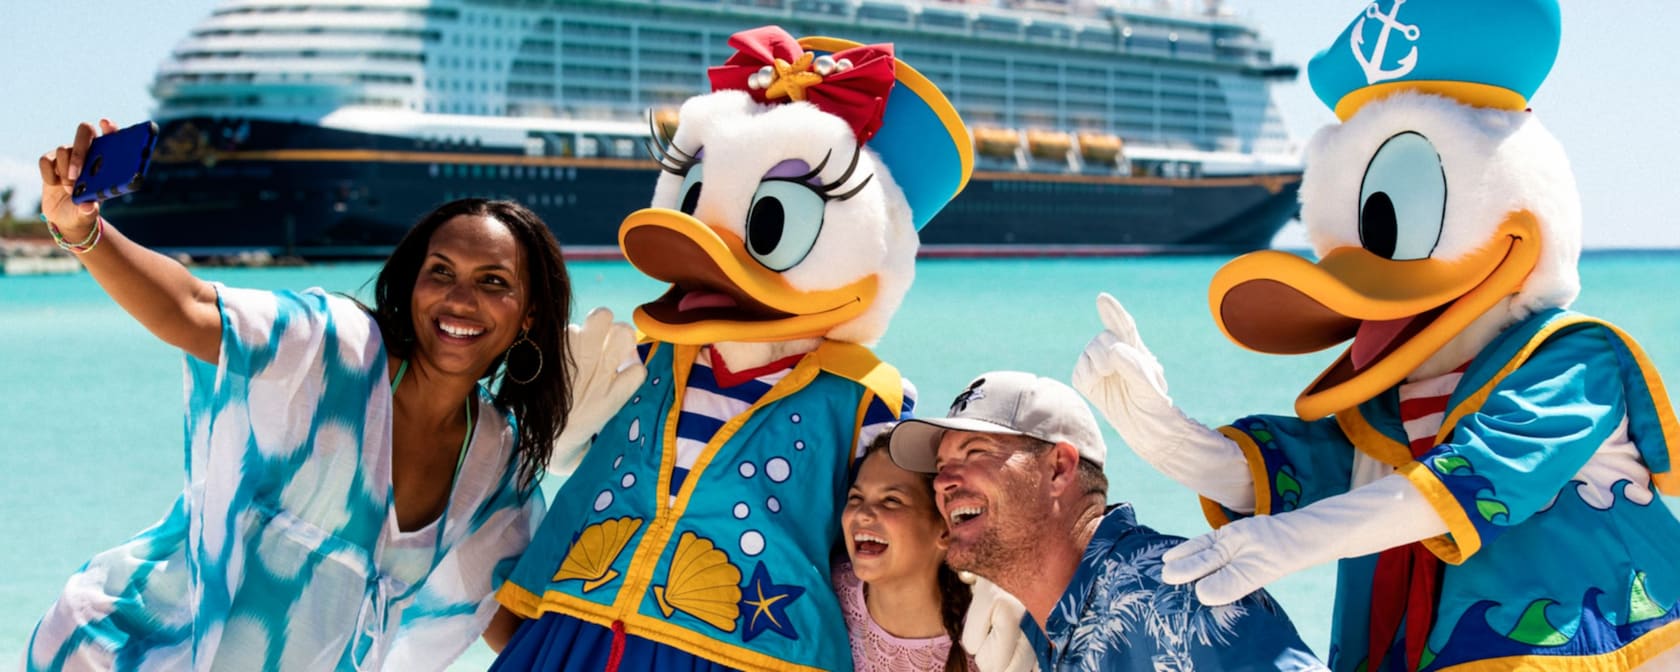 A group of 3 people taking a selfie with Donald Duck and Daisy Duck next to a harbor